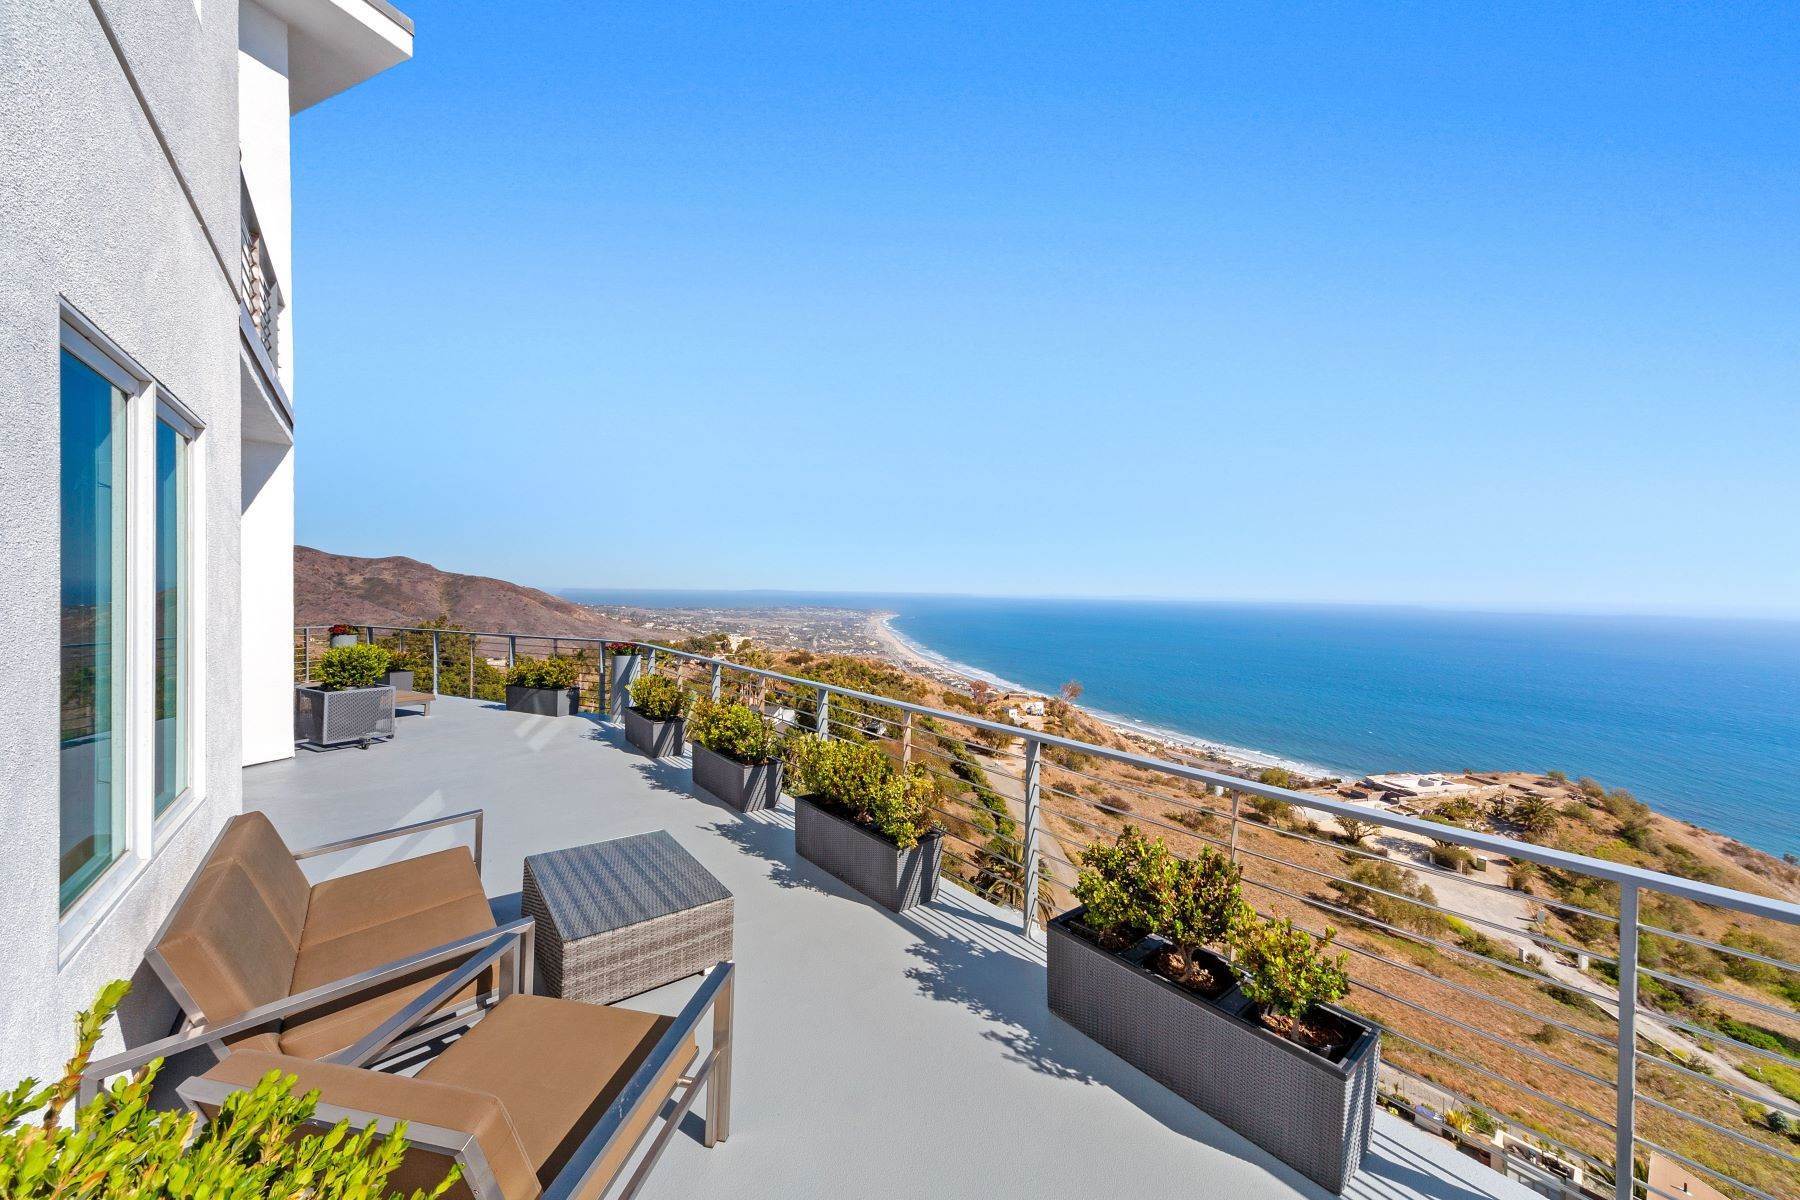 Single Family Homes for Sale at Custom Modern Estate With Ocean Views 31518 Anacapa View Dr Malibu, California 90265 United States